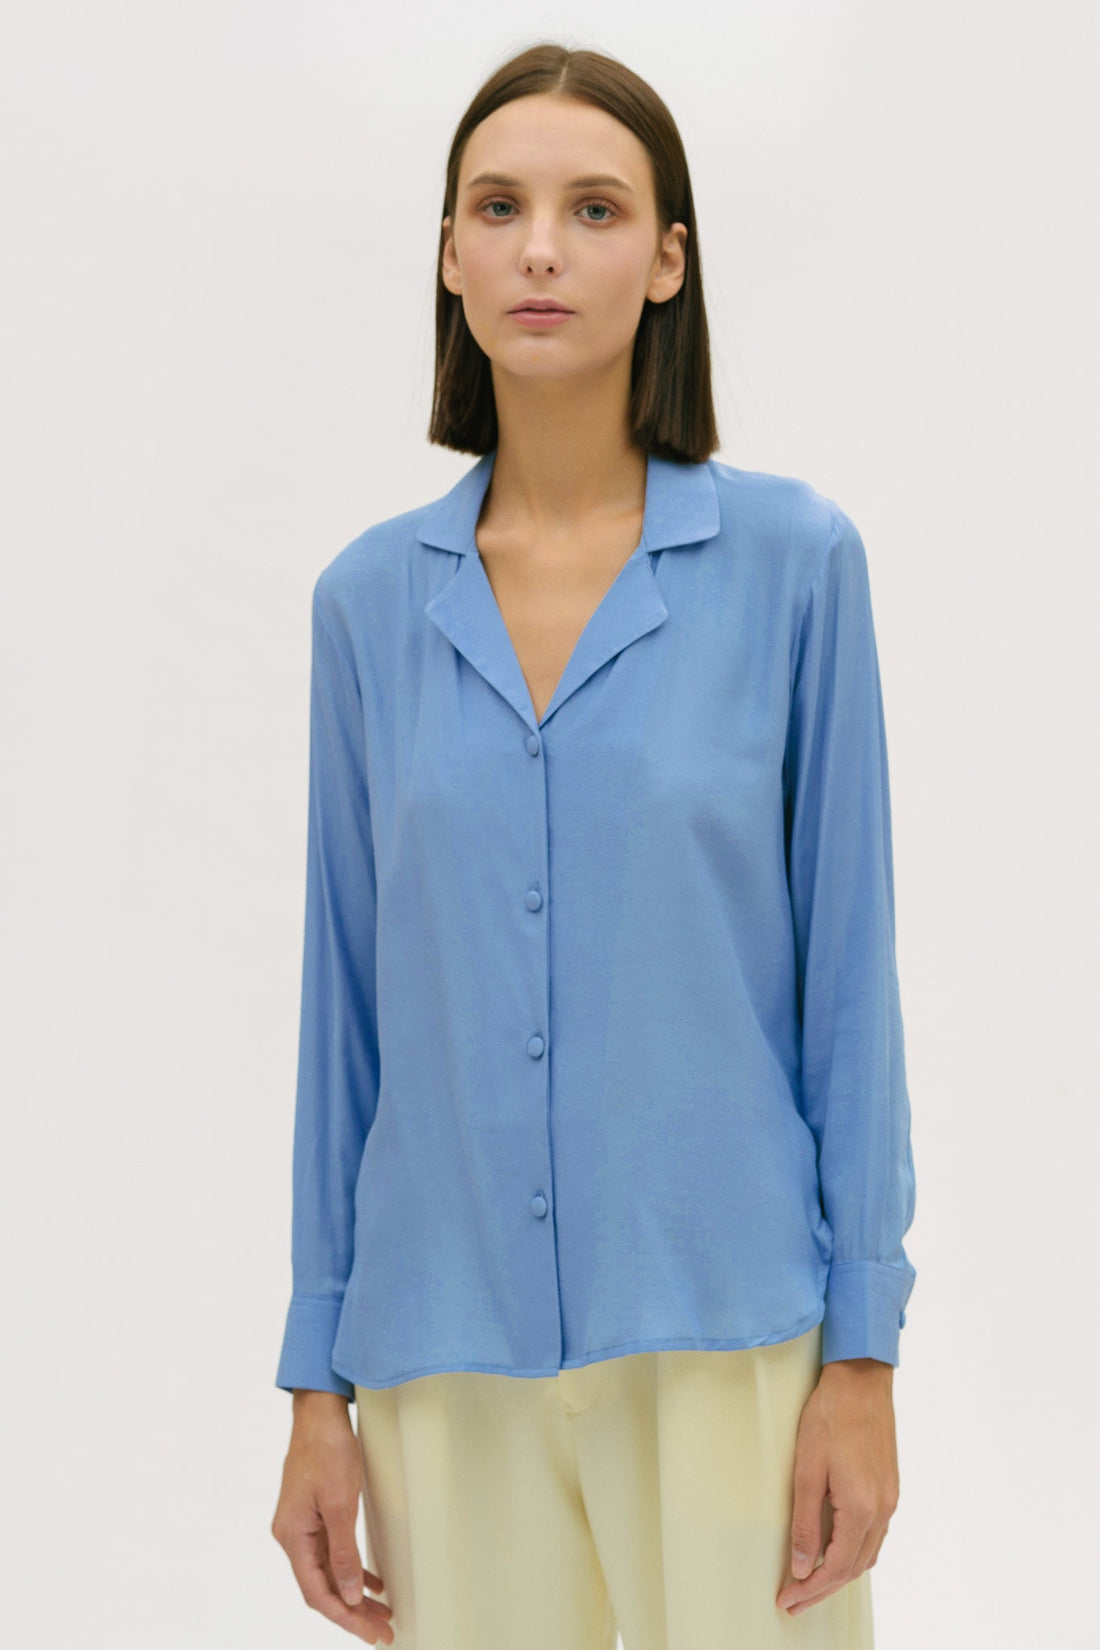 A woman is wearing a blue shirt and yellow trousers.